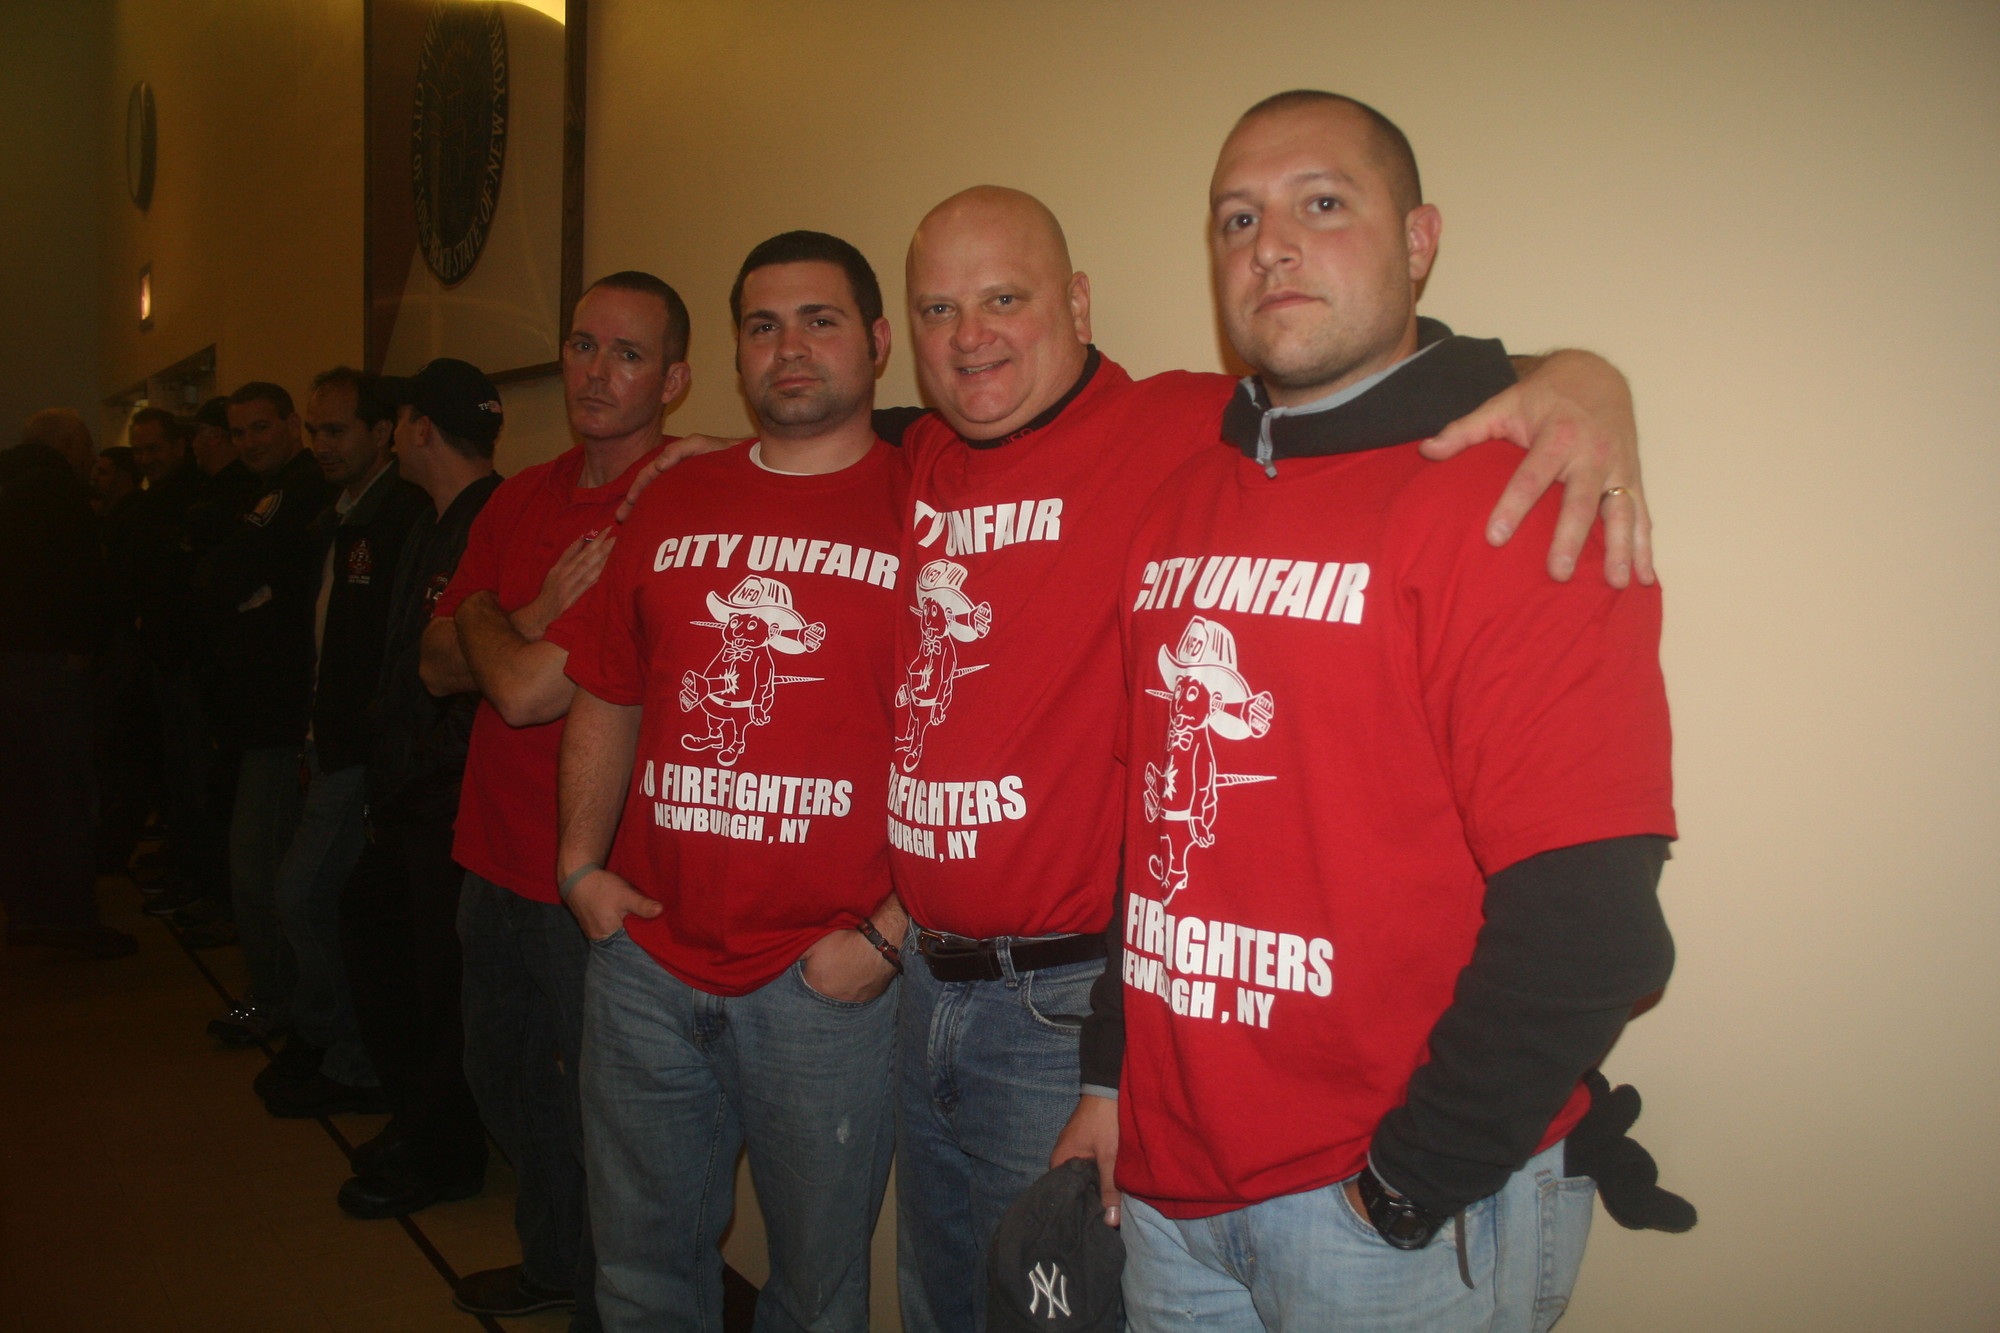 Many in the crowd, including firefighters from Newburgh, N.Y., wore red.